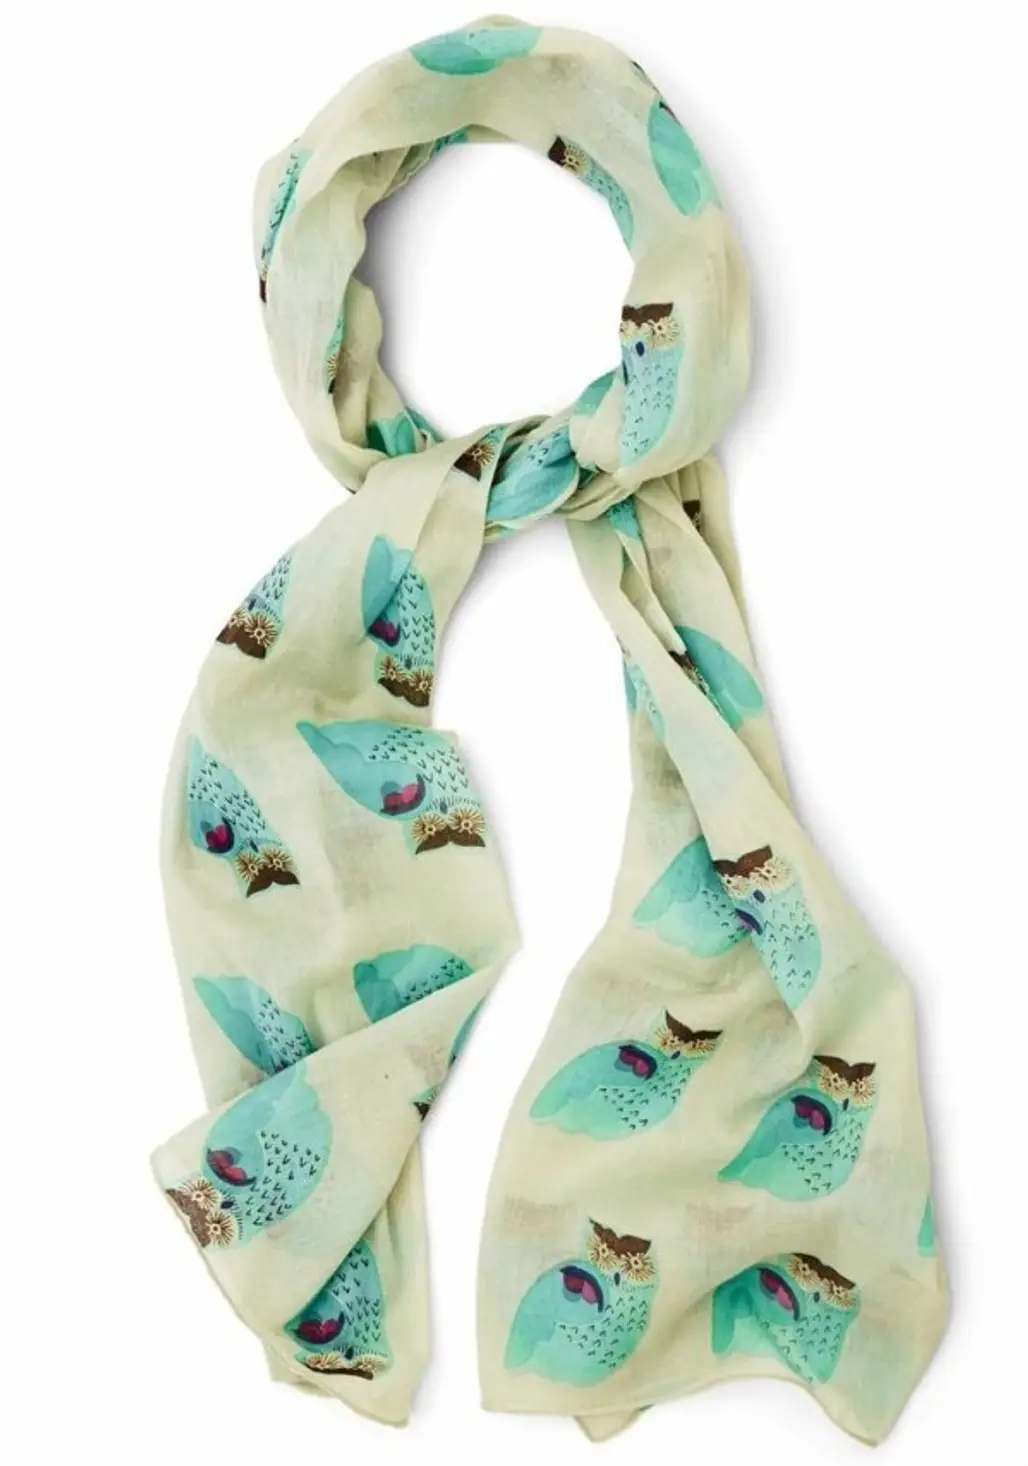 ModCloth’s Hoot That Girl? Scarf